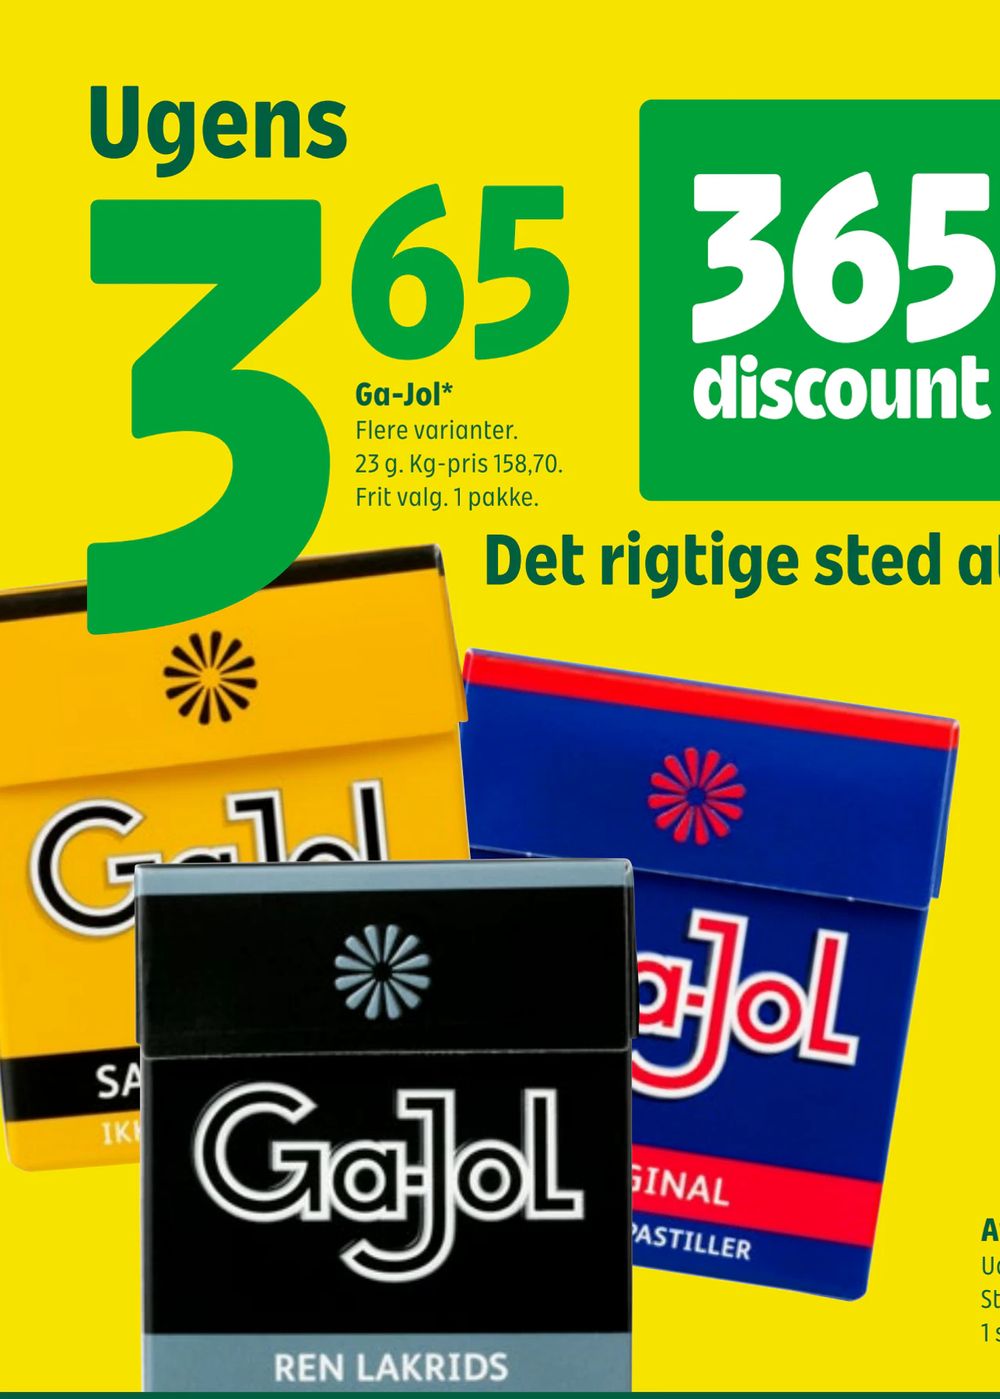 Deals on Ga-Jol from 365discount at 3,65 kr.